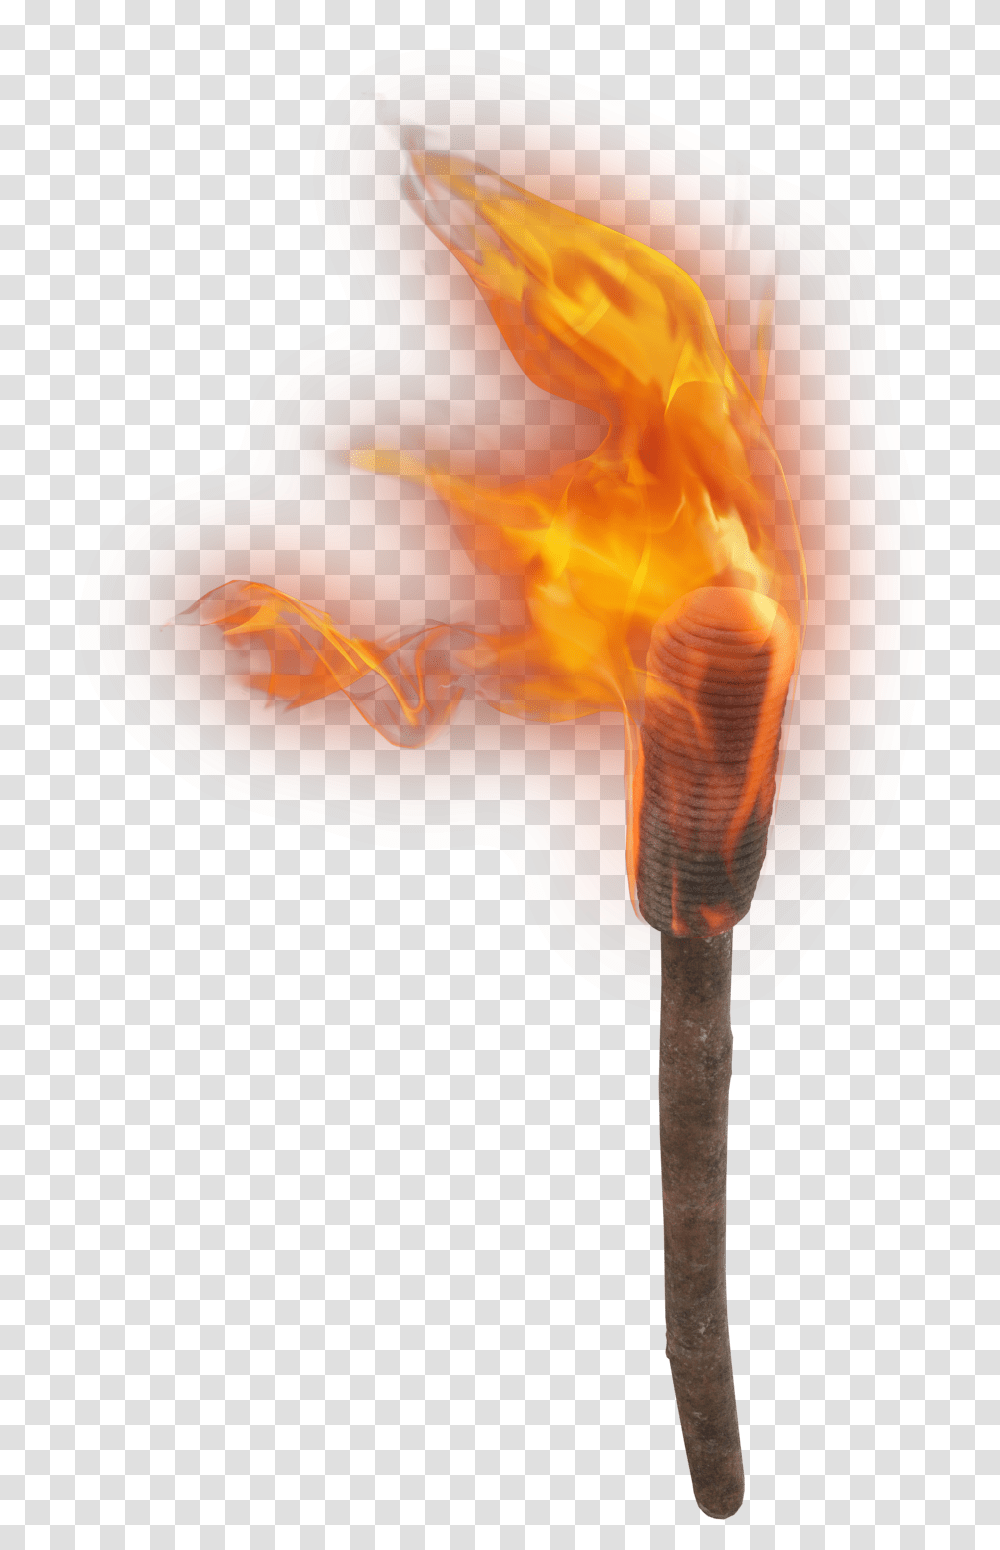 Hand Torch Image For Free Download Fire On A Stick, Text, Mountain, Outdoors, Nature Transparent Png